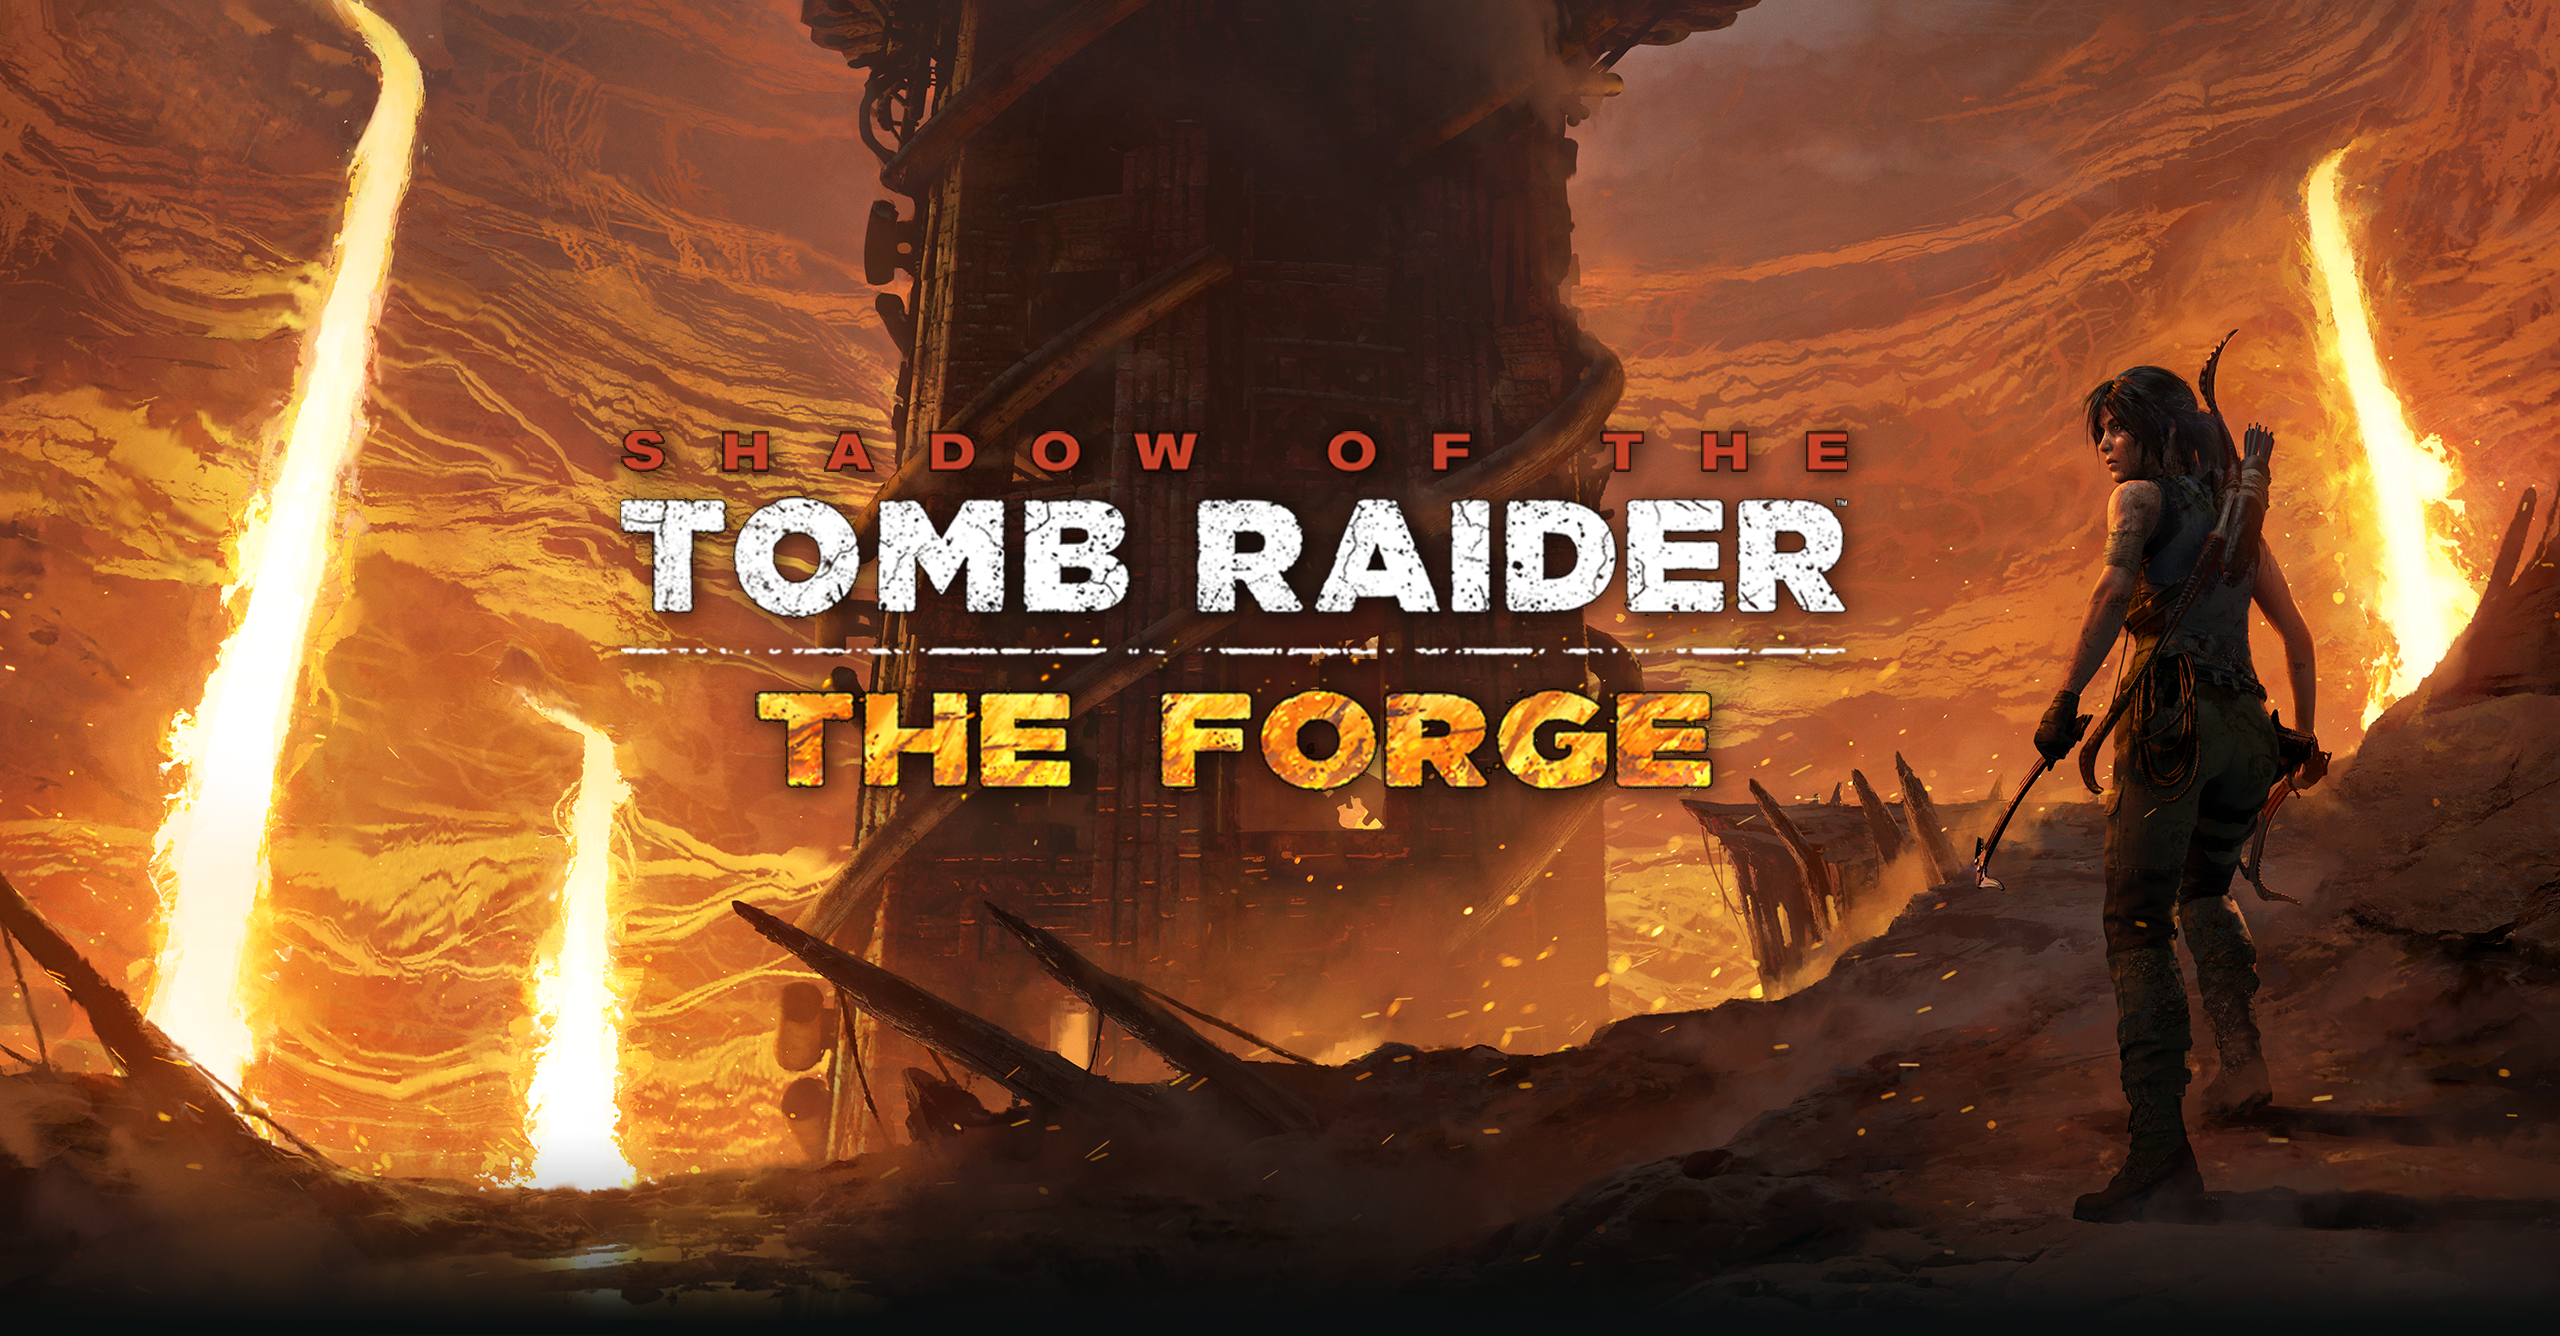 Media asset in full size related to 3dfxzone.it news item entitled as follows: Square Enix annuncia il DLC The Forge di Shadow of the Tomb Raider | Image Name: news28795_The-Forge-Shadow-of-the-Tomb-Raider_3.png